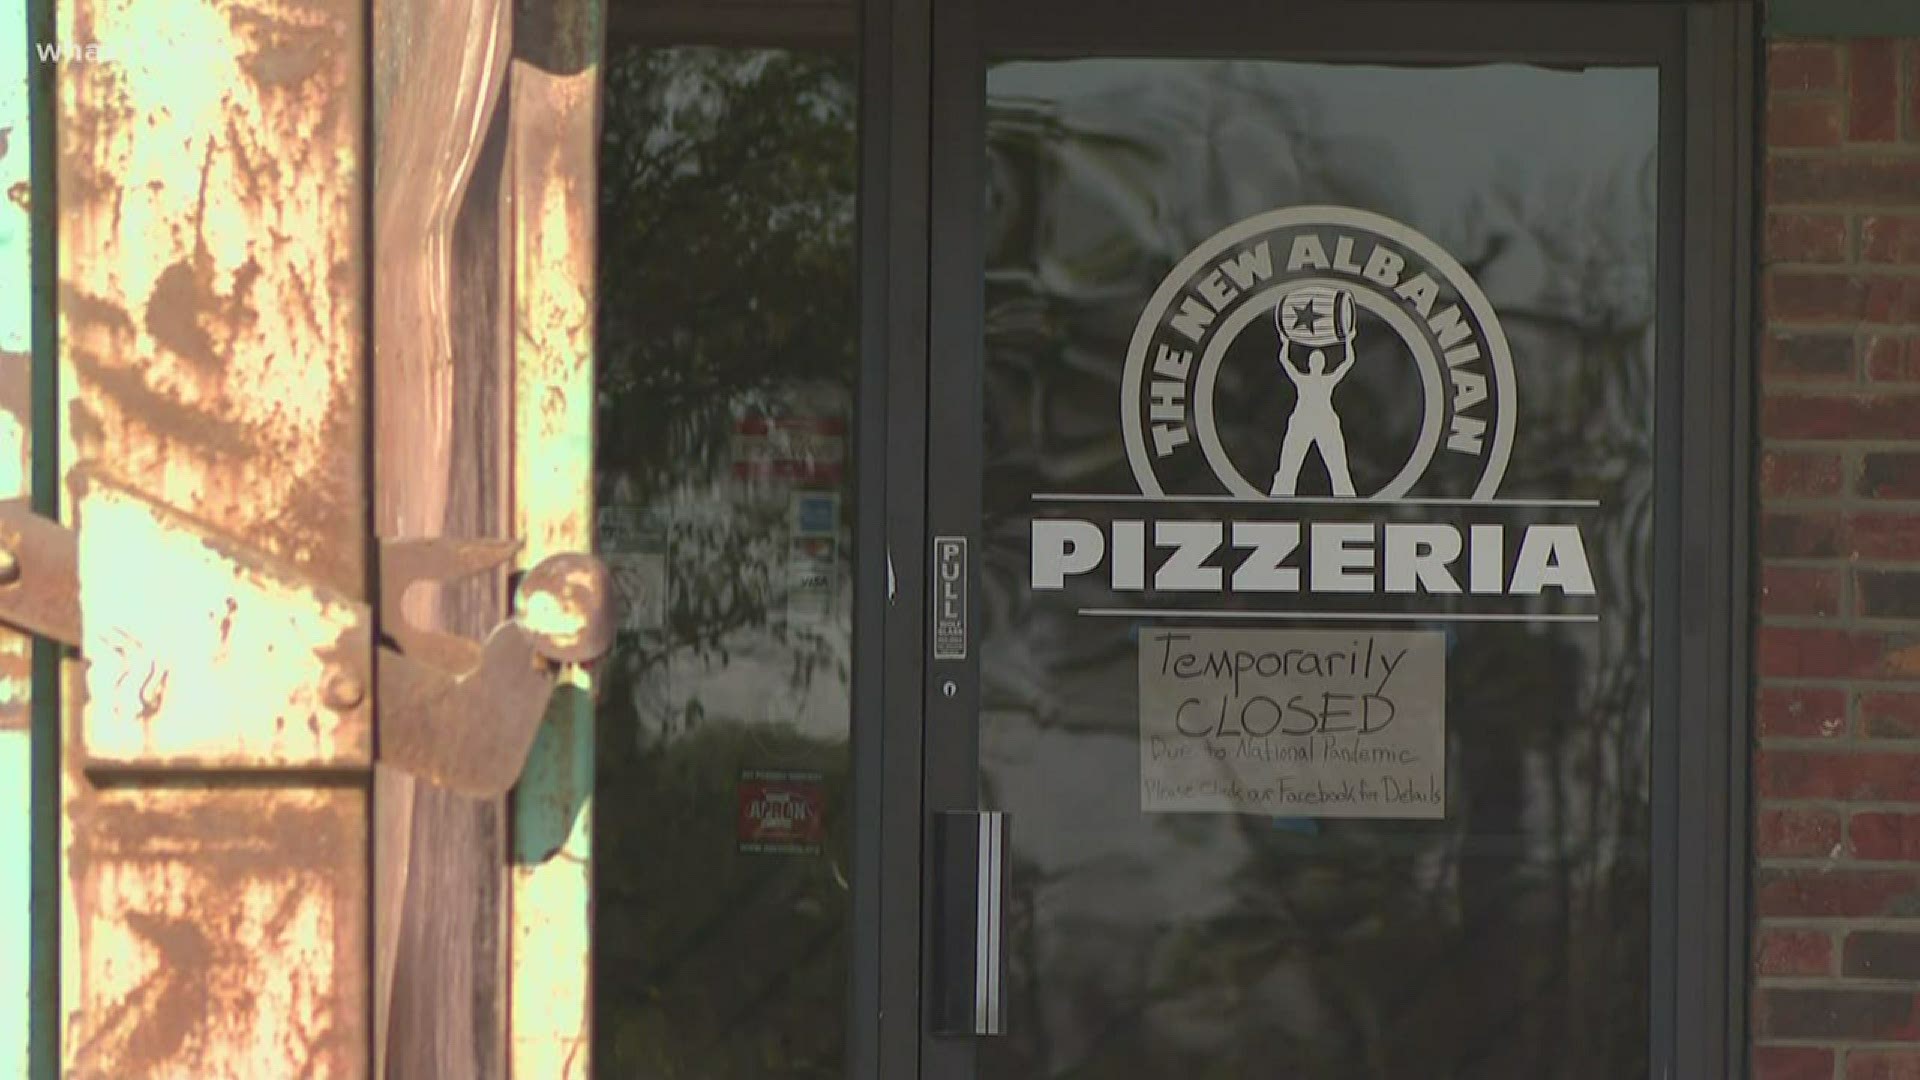 The New Albanian Brewing Co. and Pizzeria will remain cautious about reopening after governor gives go ahead-for May 11.